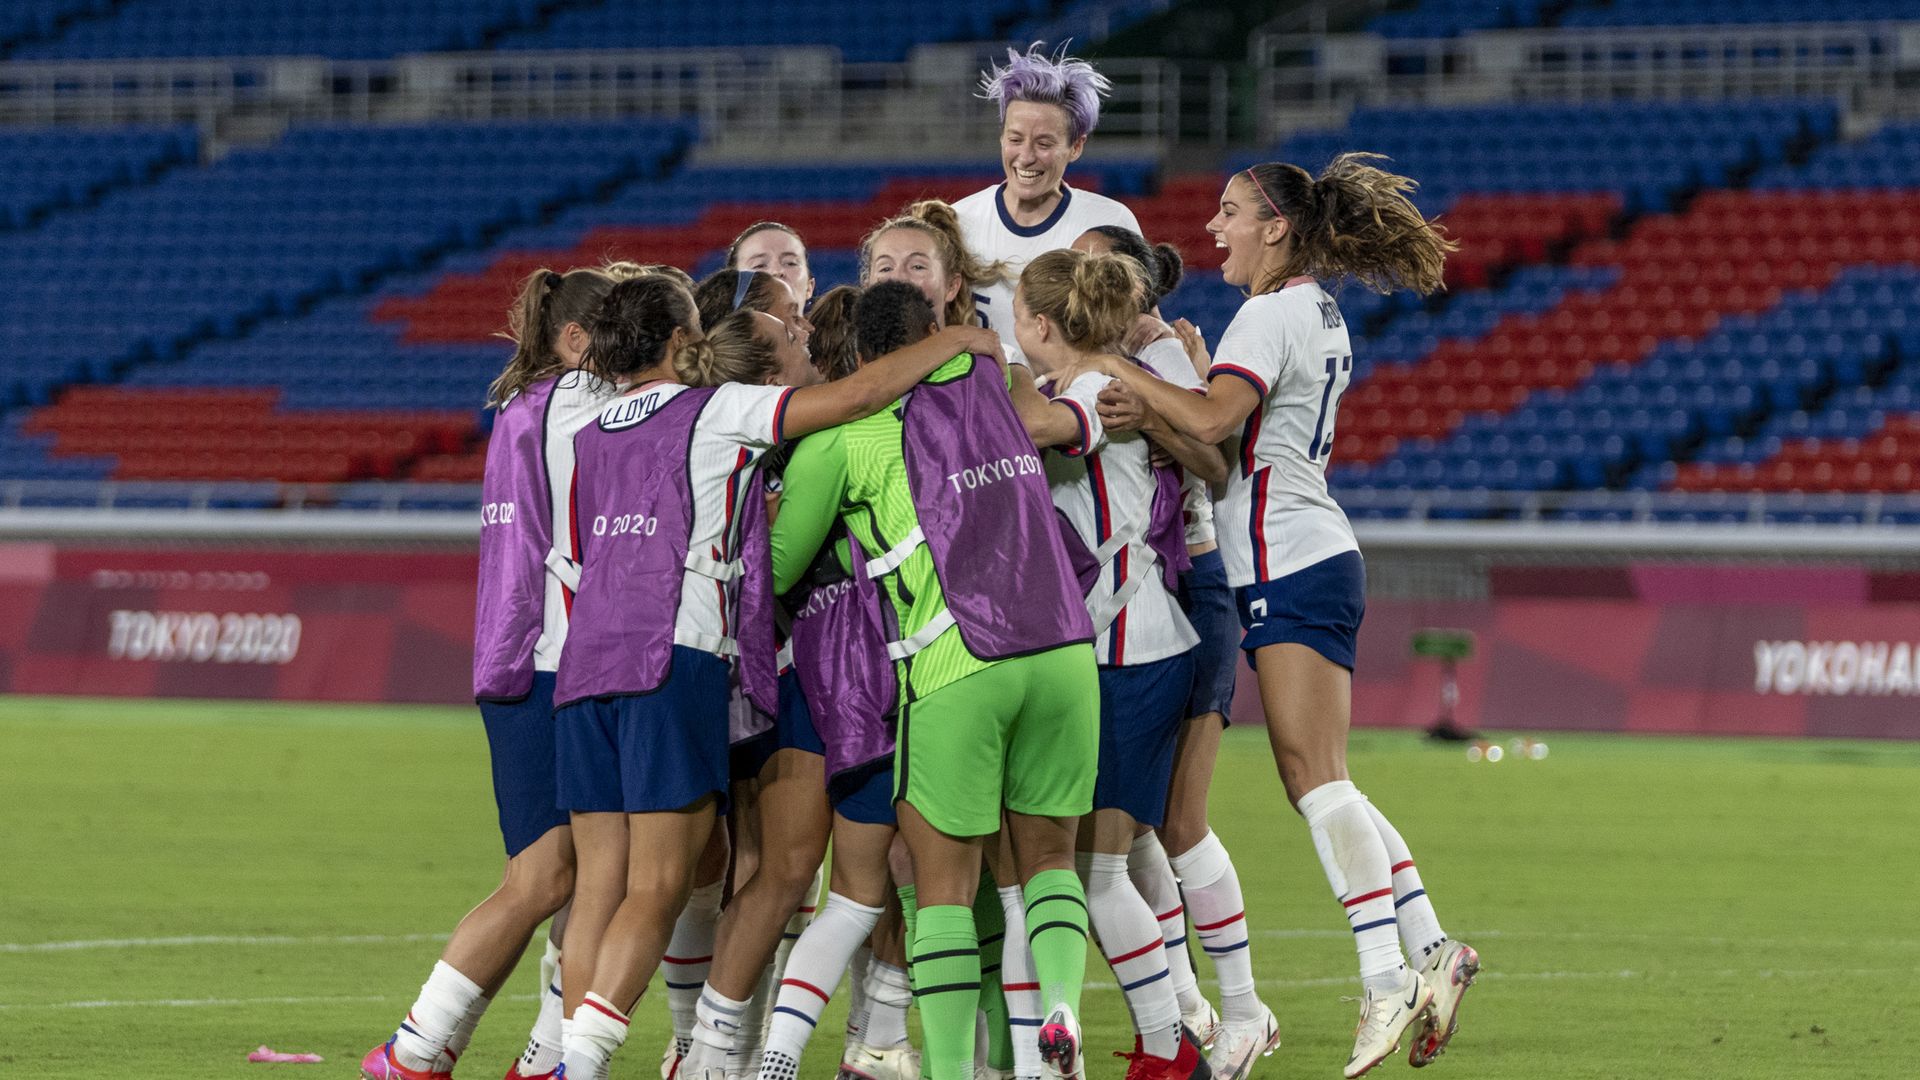 The U.S. women's team celebrates after beating the Netherlands. Photo: 